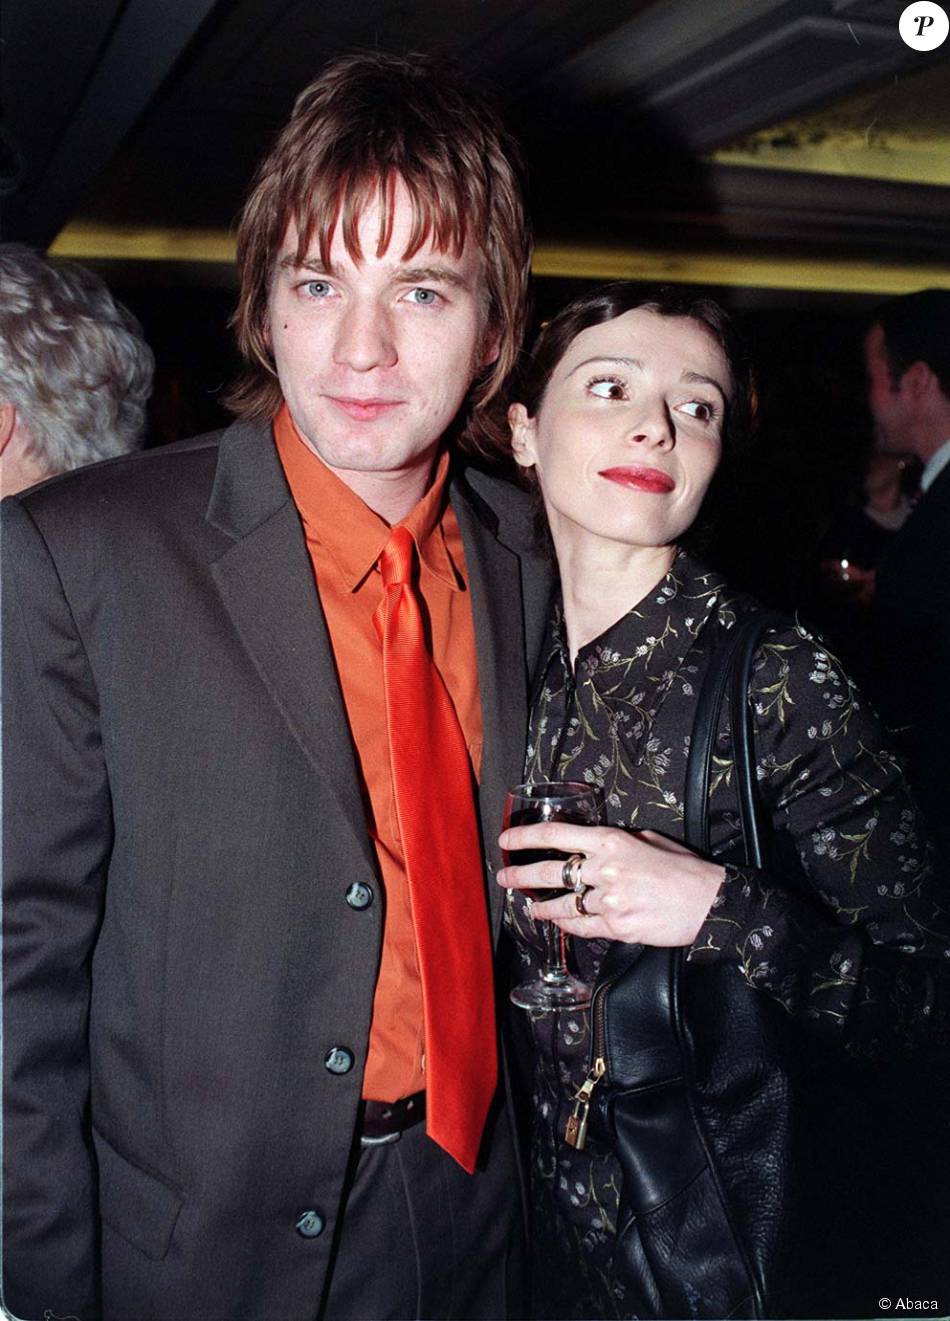 Actor Ewan McGregor of Trainspotting, with his wife Eve, at the Variety Club Awards in London, UK on February 11, 1997, where he received an award for Film Actor of 1996. Photo by David Cheskin/PA Photos/ABACAPRESS.COM11/02/1997 - London